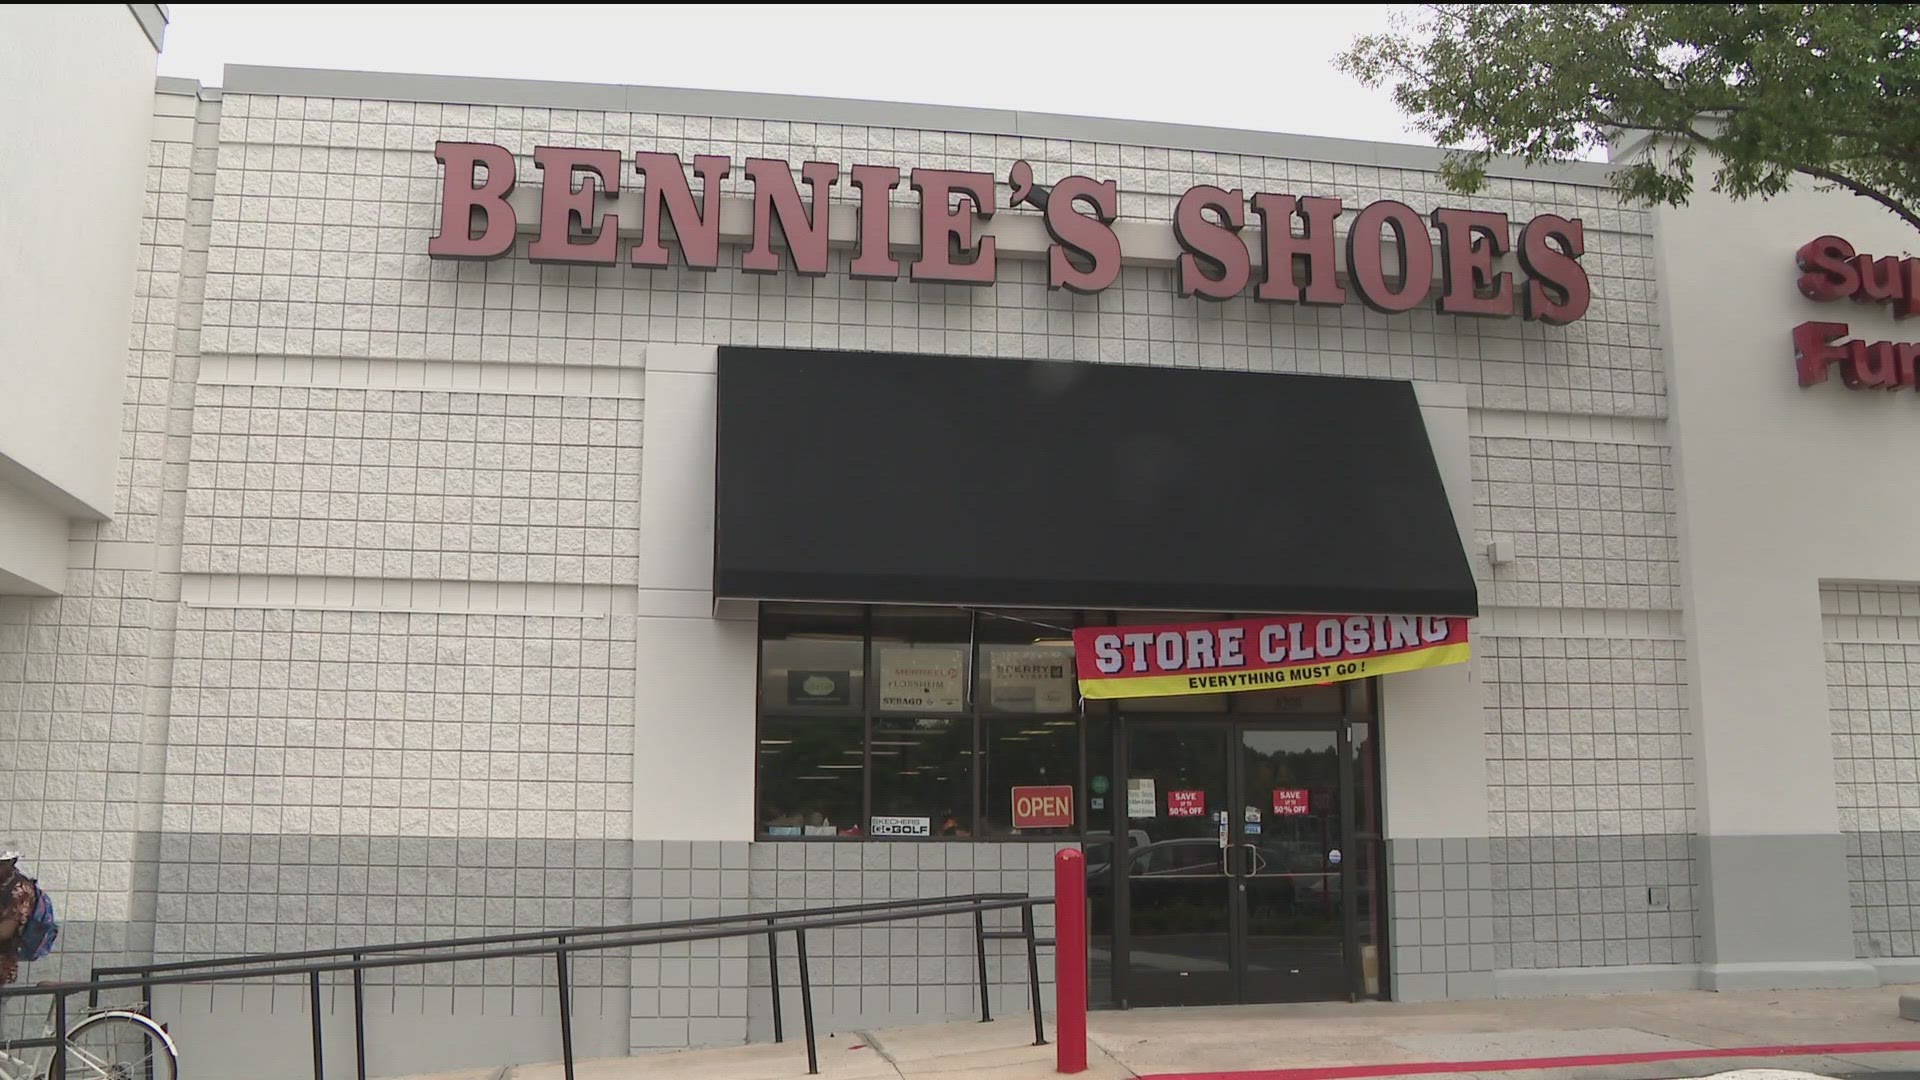 Atlanta's Bennie's Shoes to close down after 114 years | 11alive.com